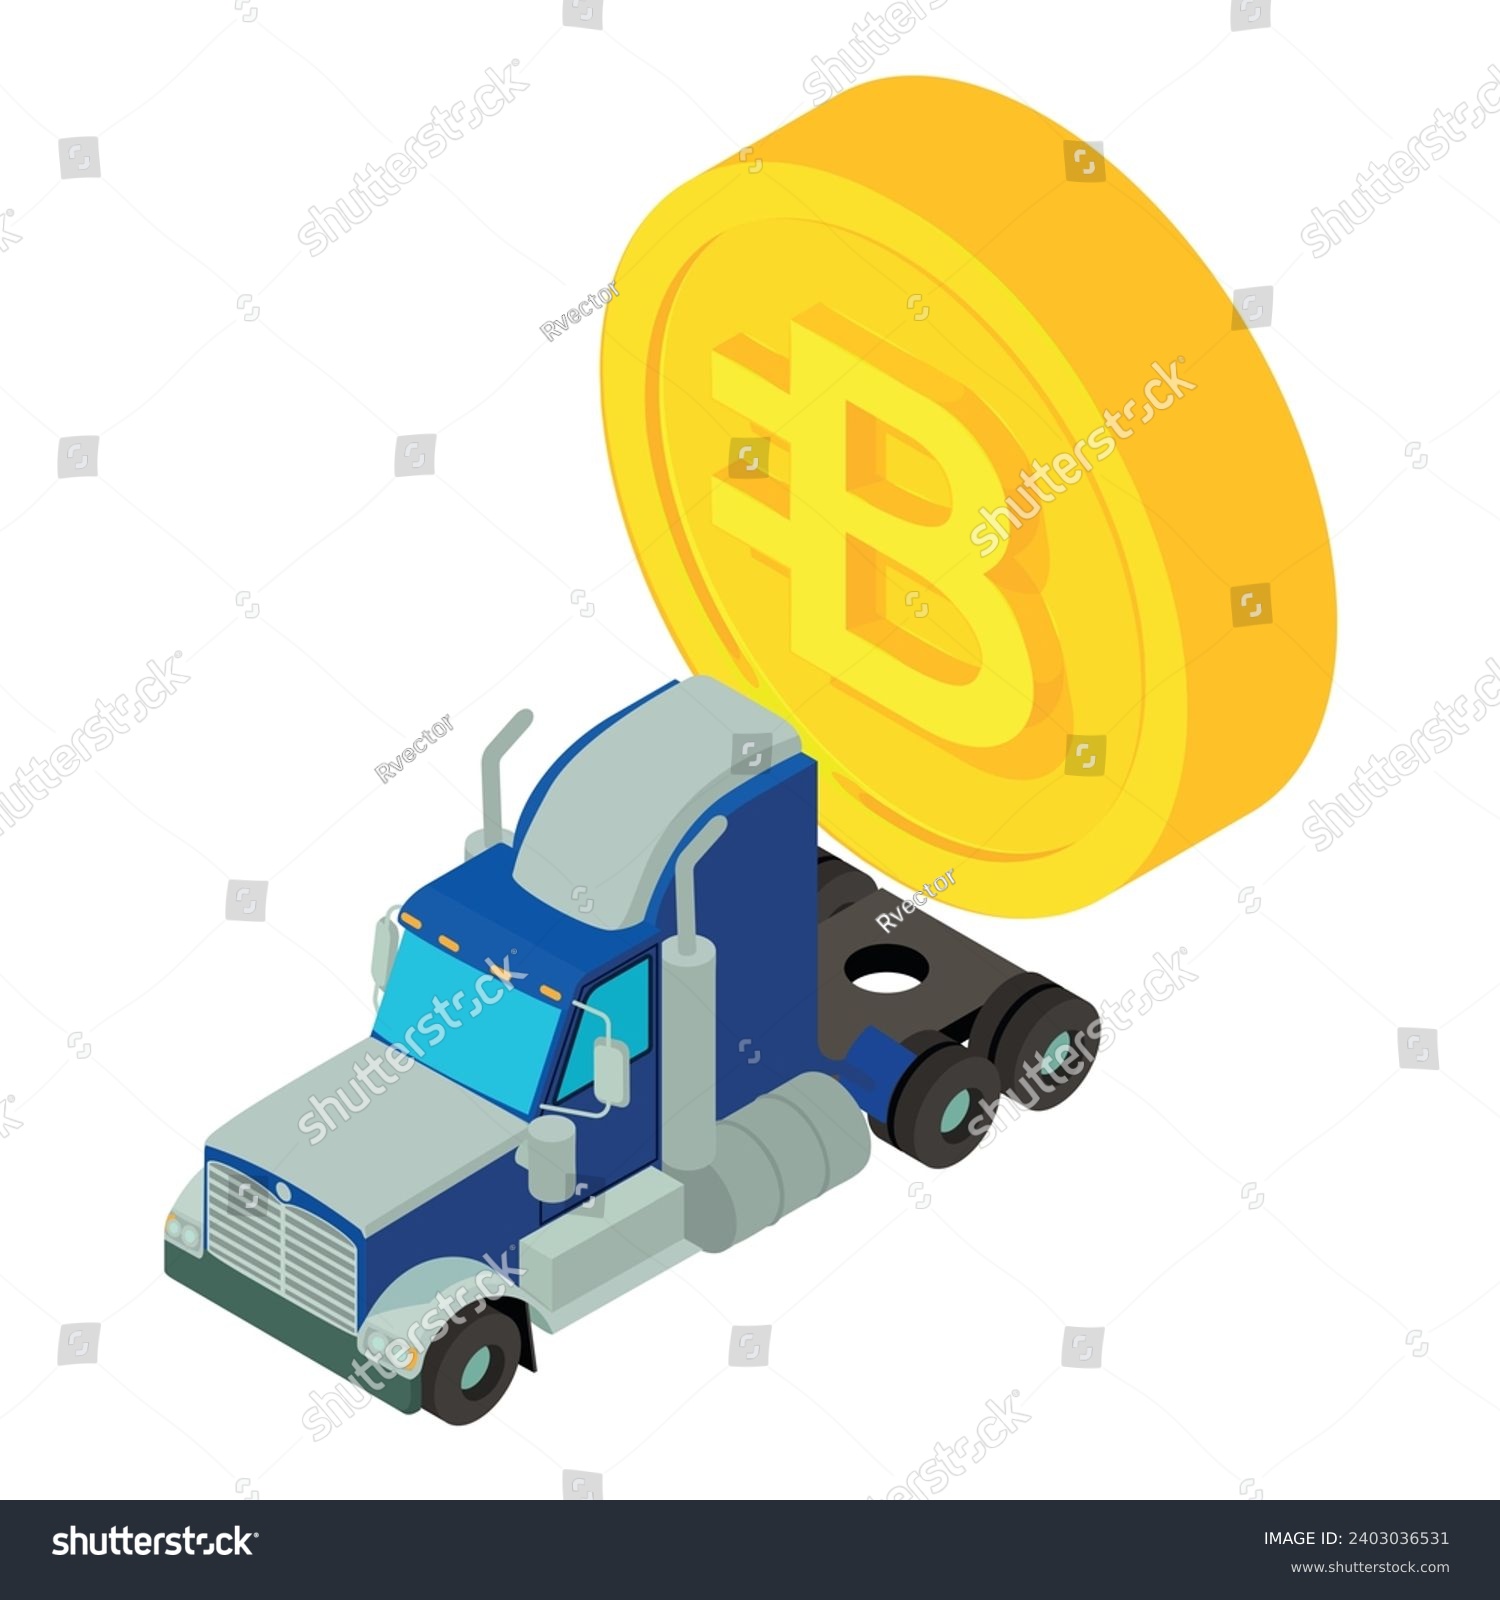 SVG of Bytecoin cryptocurrency icon isometric vector. Big gold bytecoin coin and truck. Digital money, cryptocurrency concept svg